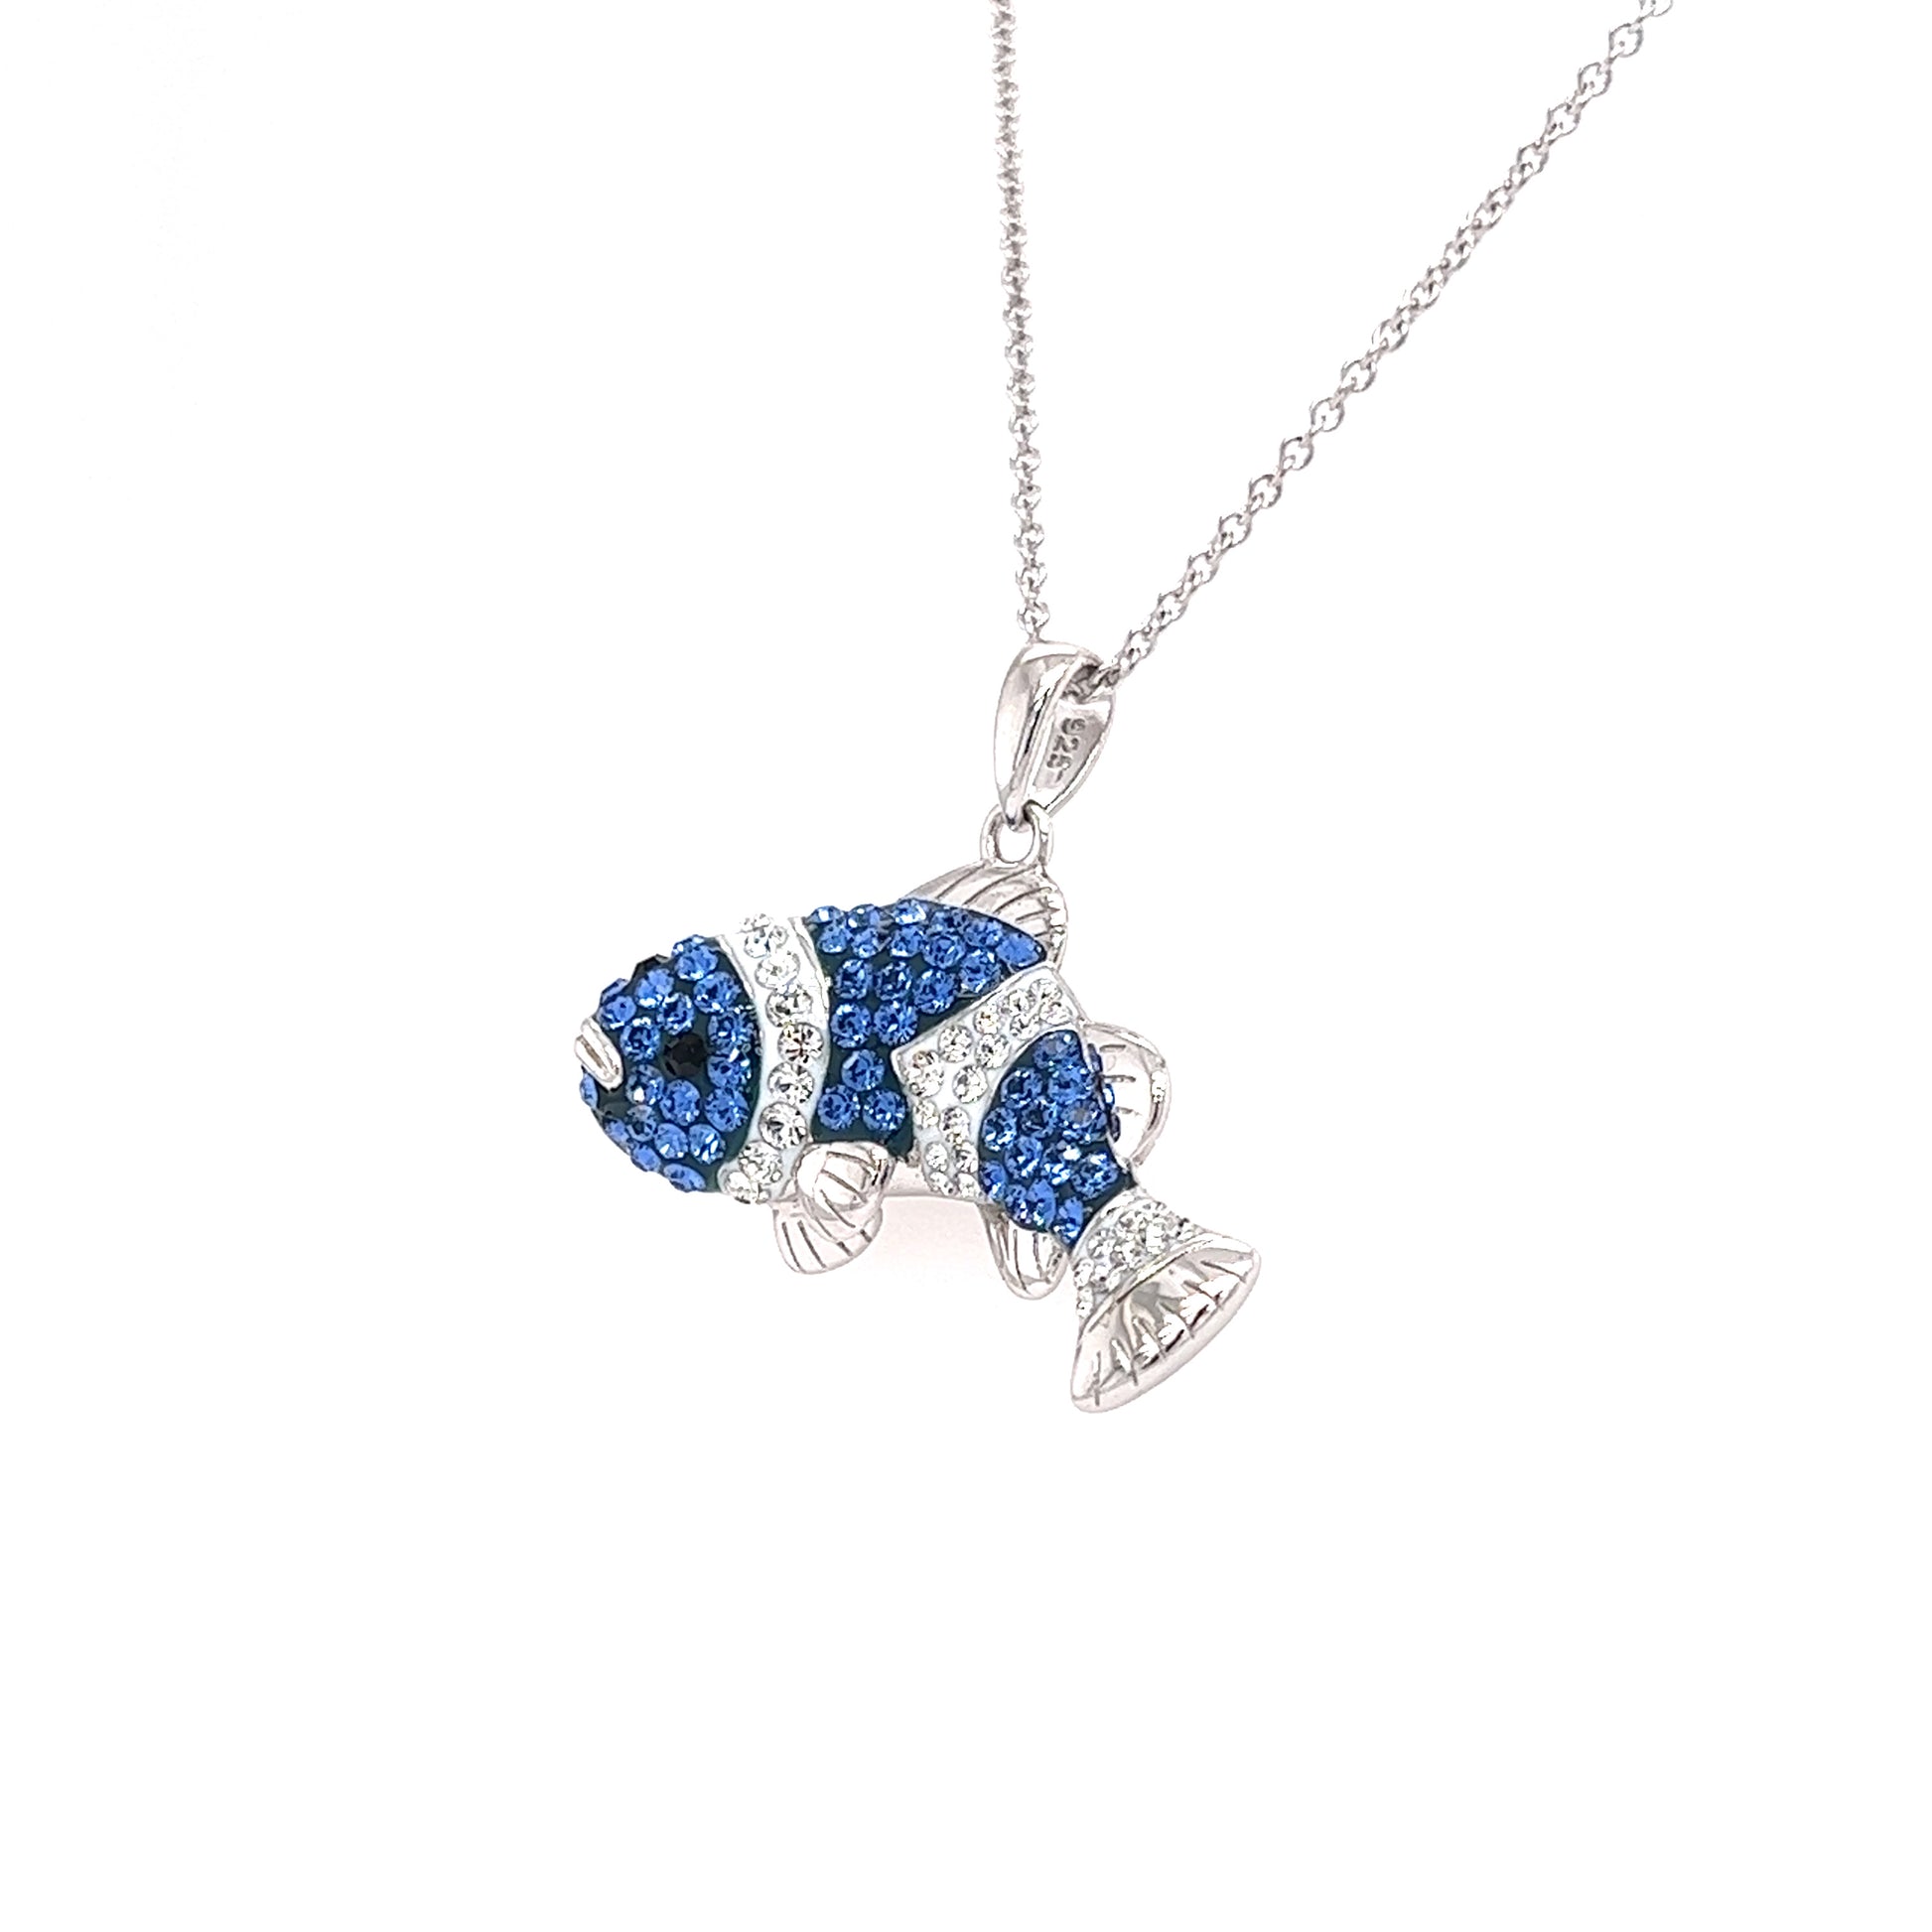 Clownfish Necklace with Blue and White Crystals in Sterling Silver Right Side View